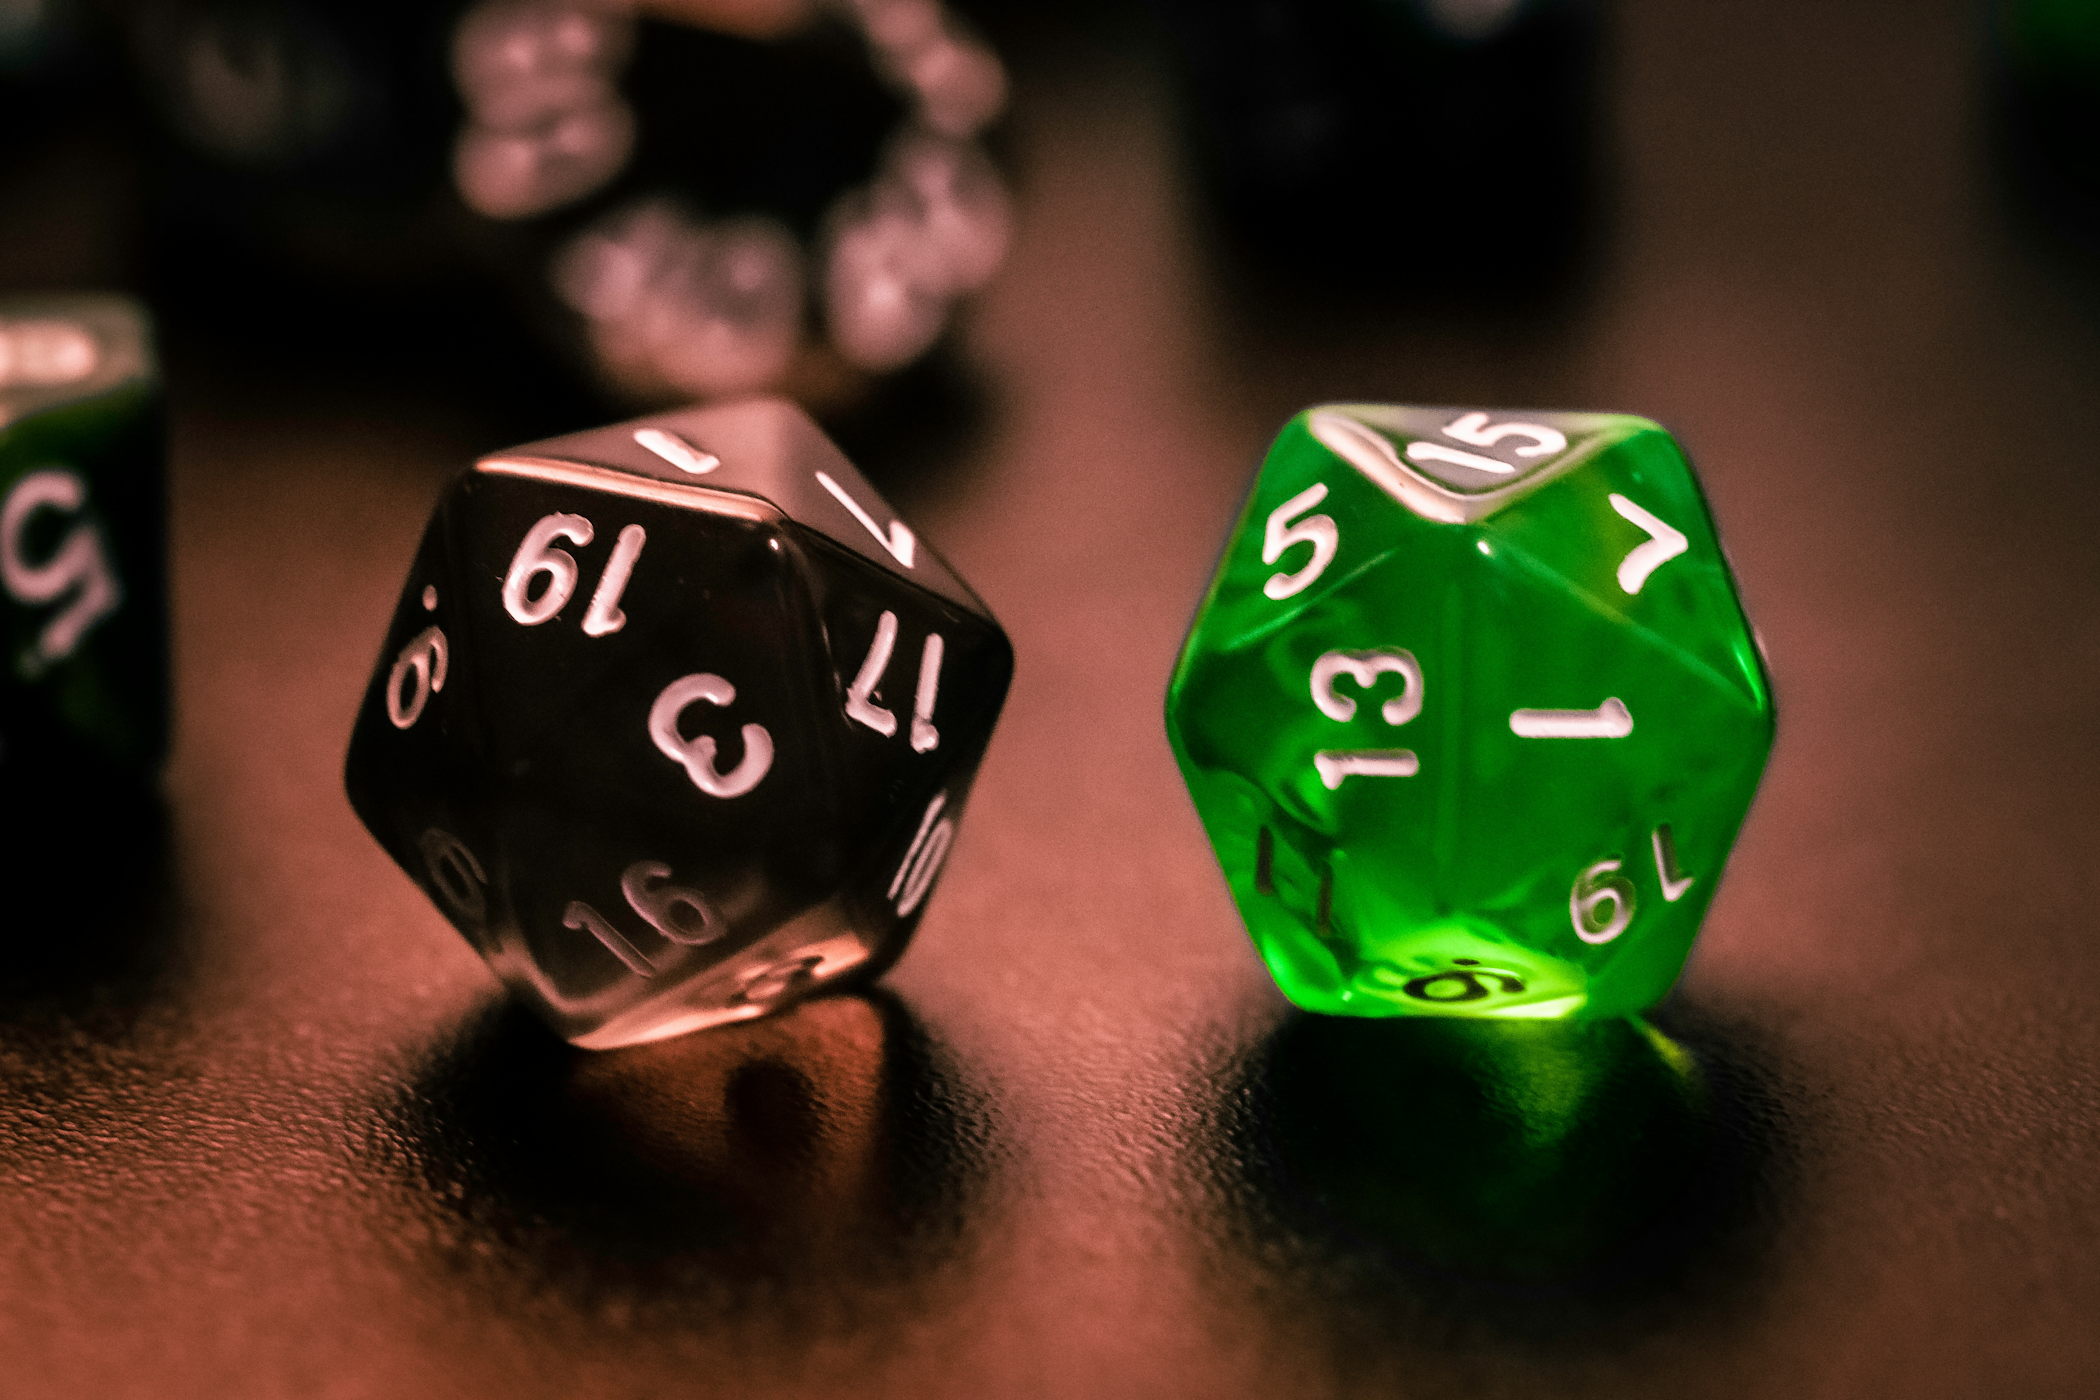 Two D20s